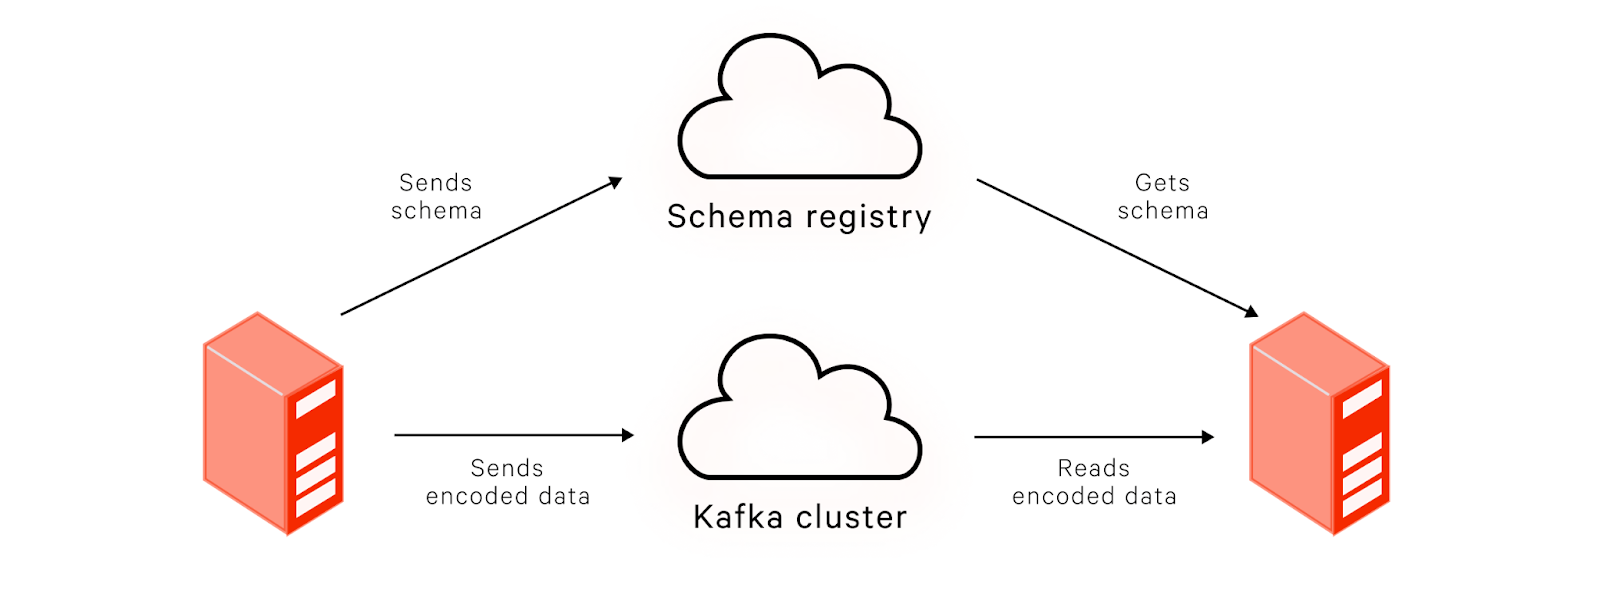 The Schema Registry lets producers communicate to consumers which schema a message uses.